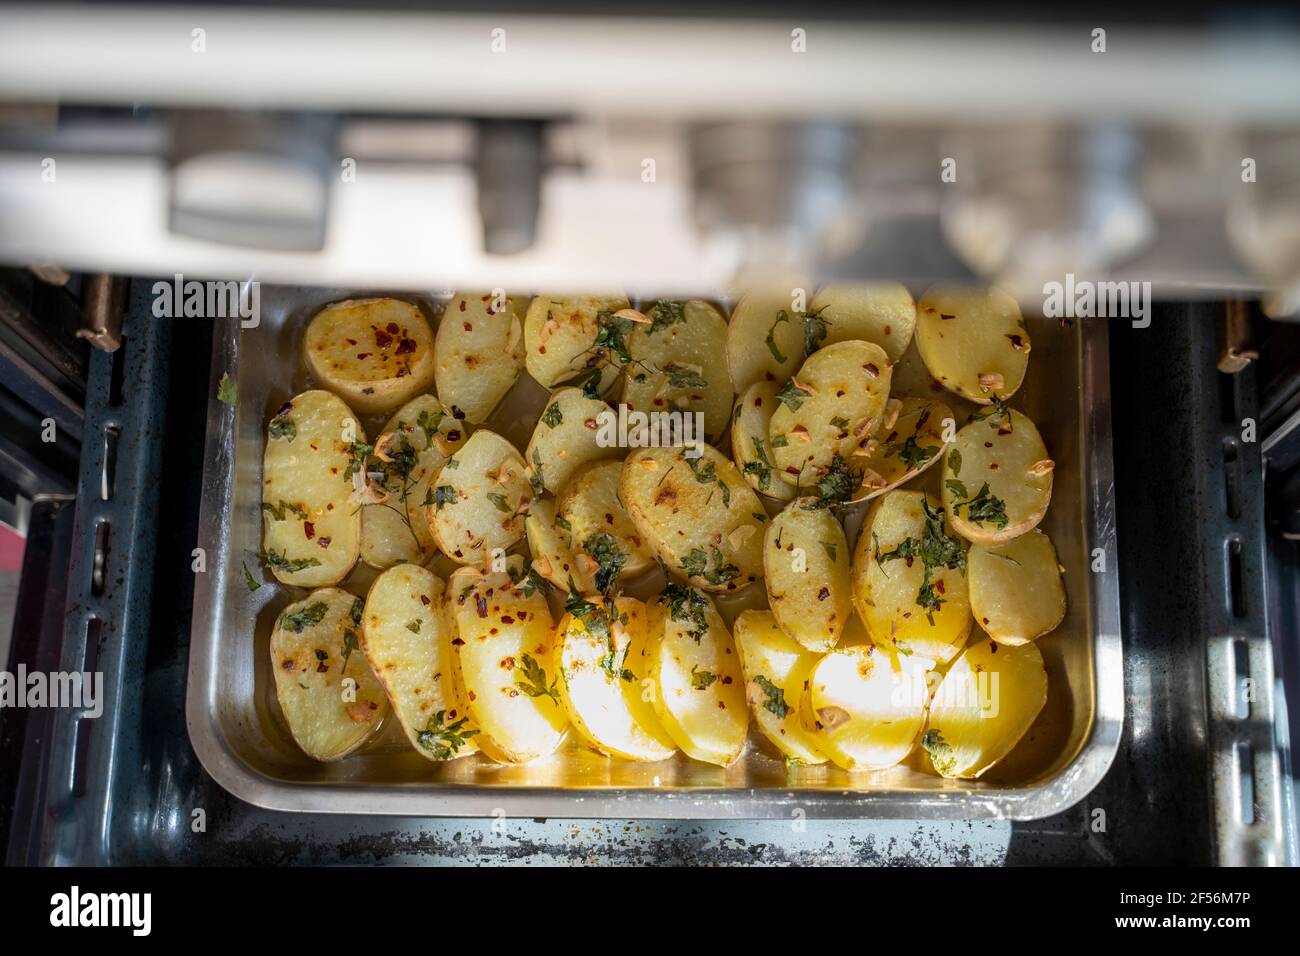 Oven roasted potatoes with garnished coriander in oven tray Stock Photo